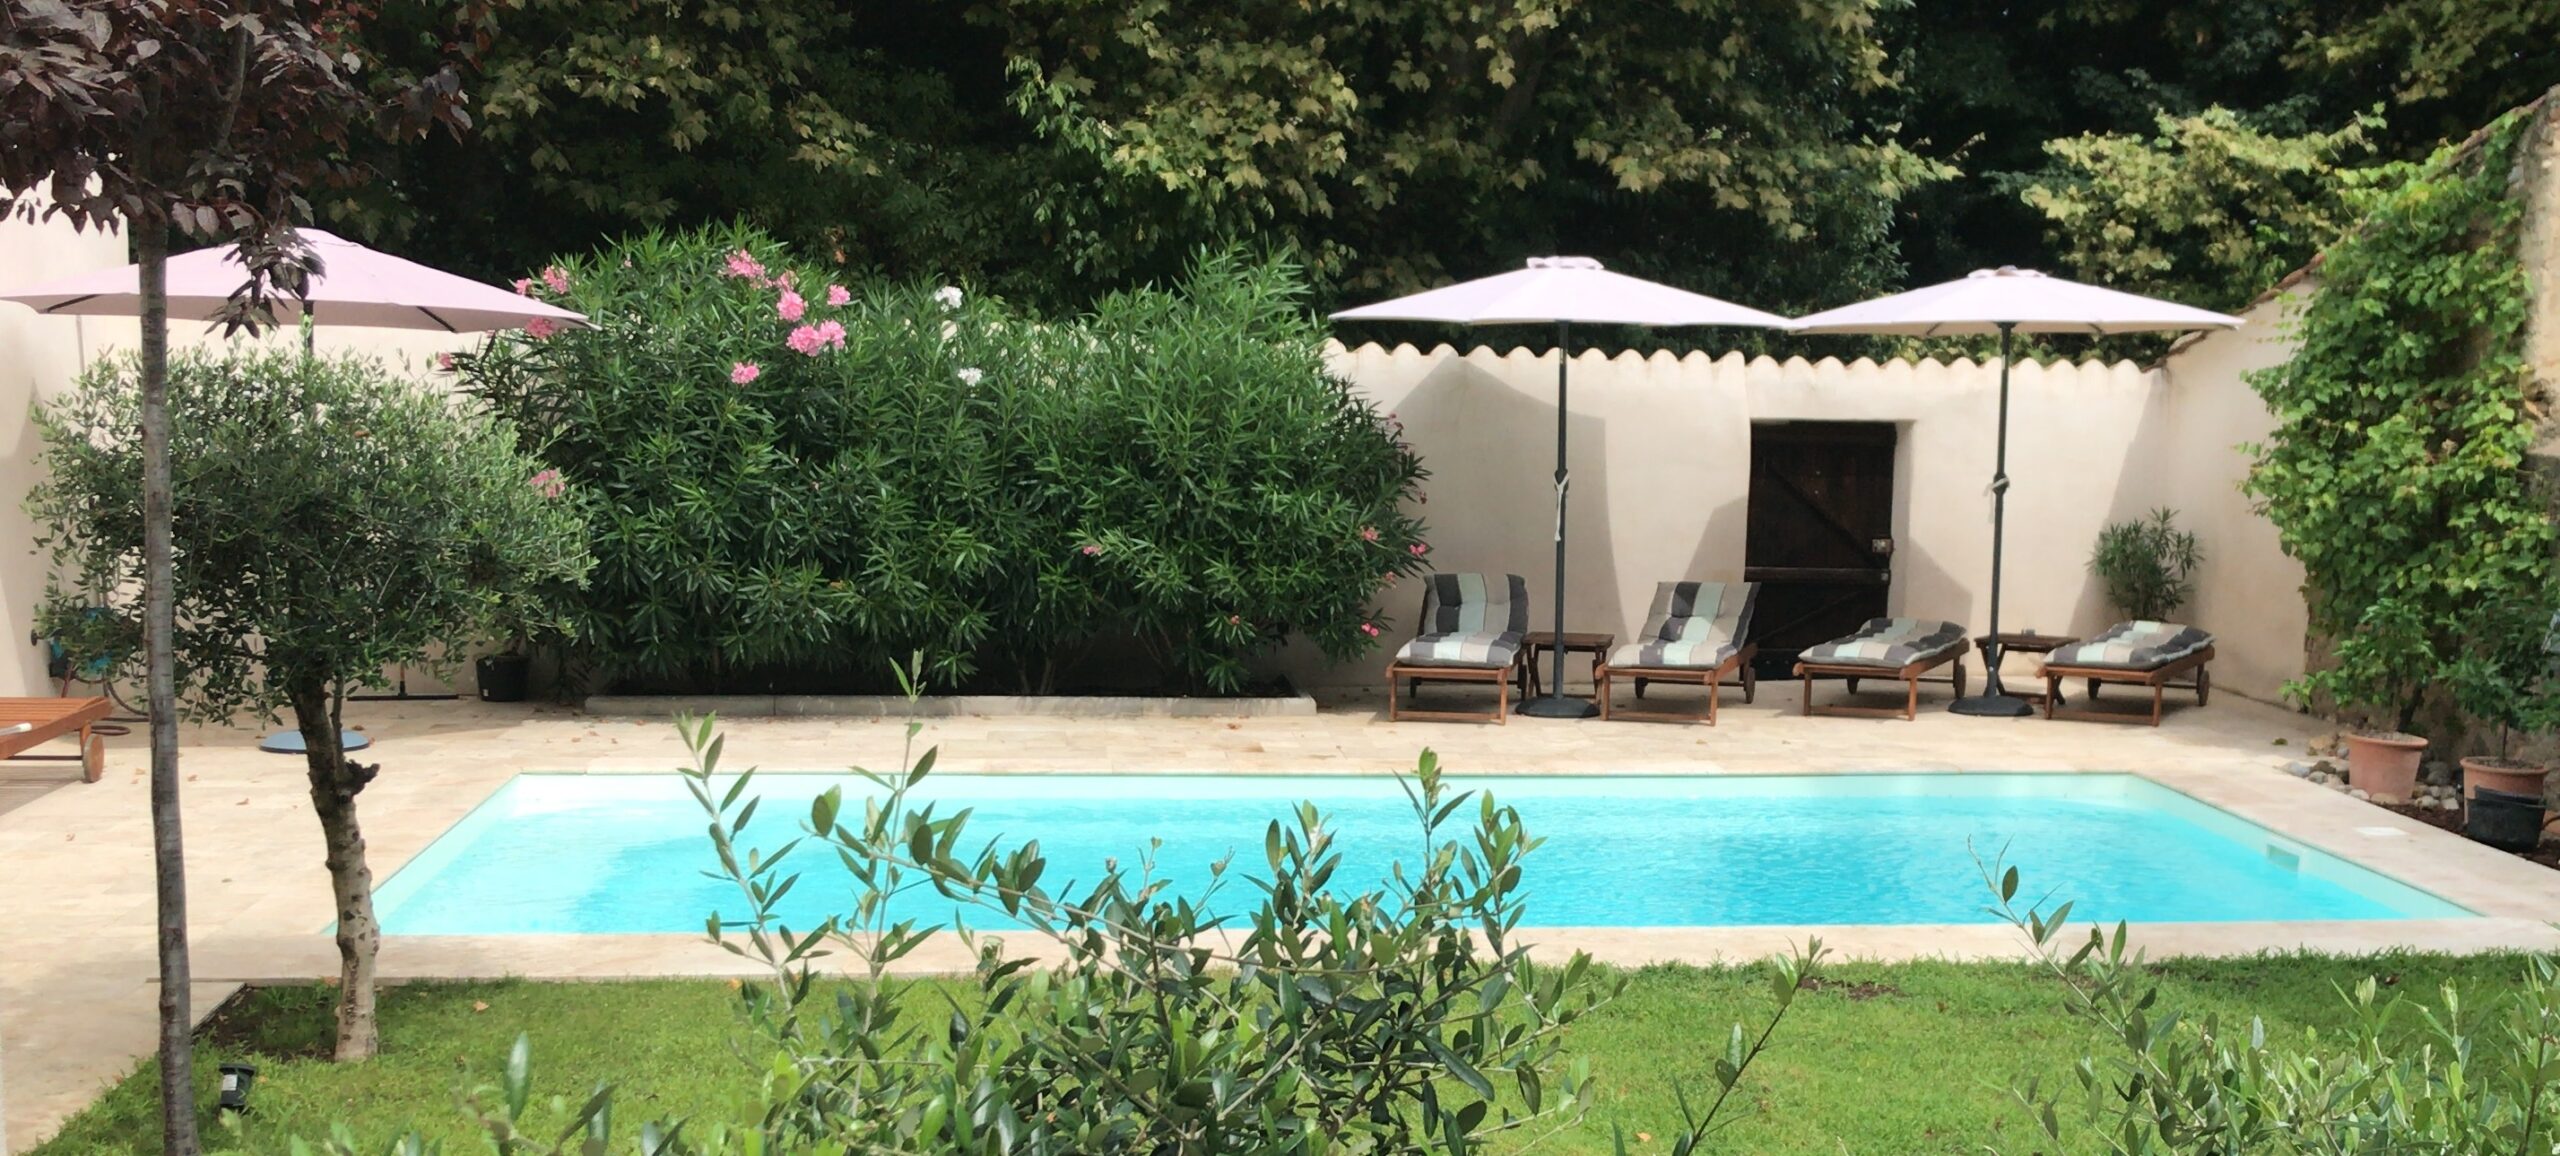 view on the pool and sunbathing area at the bed and breakfast maison la vie est belle